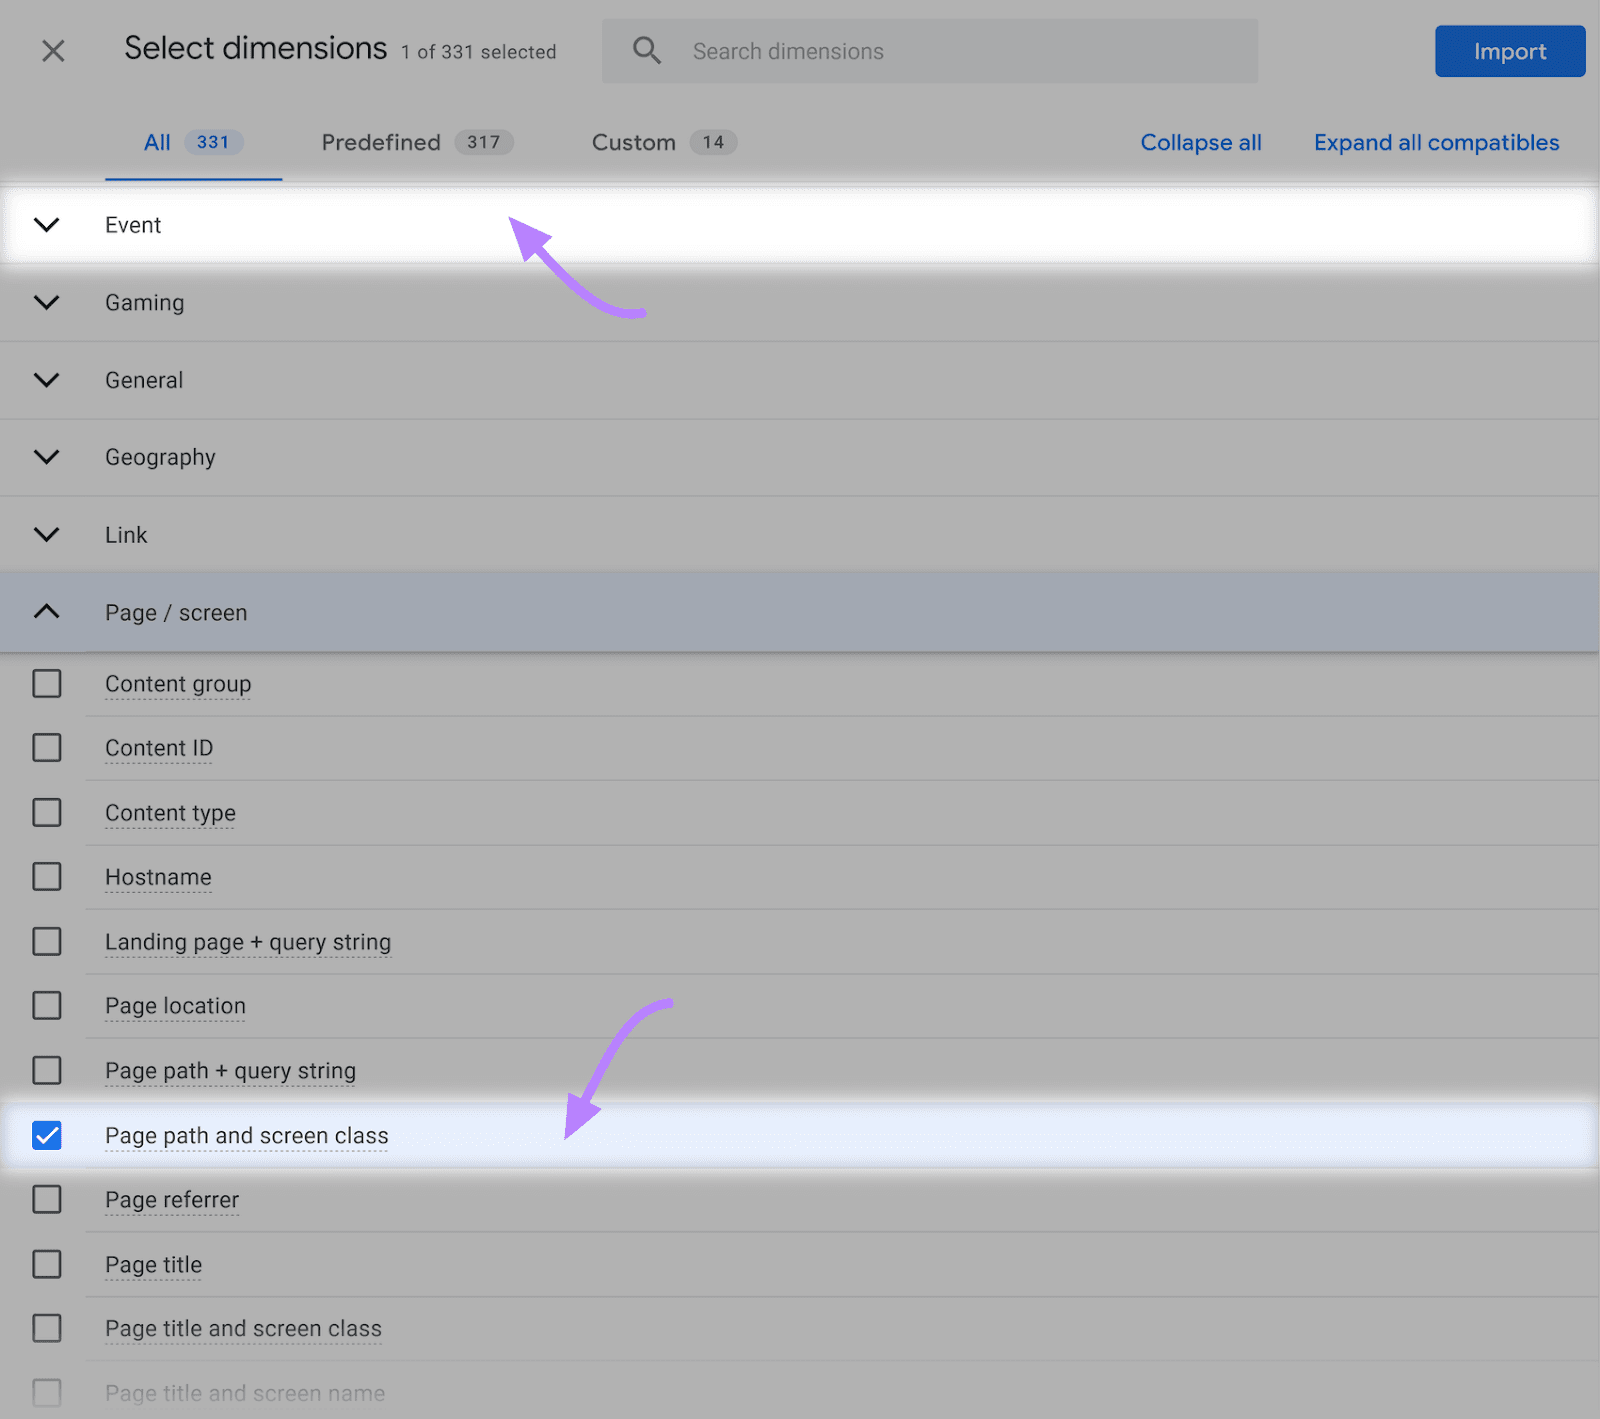 “Page path and screen class” dimension selected and "Event" option highlighted